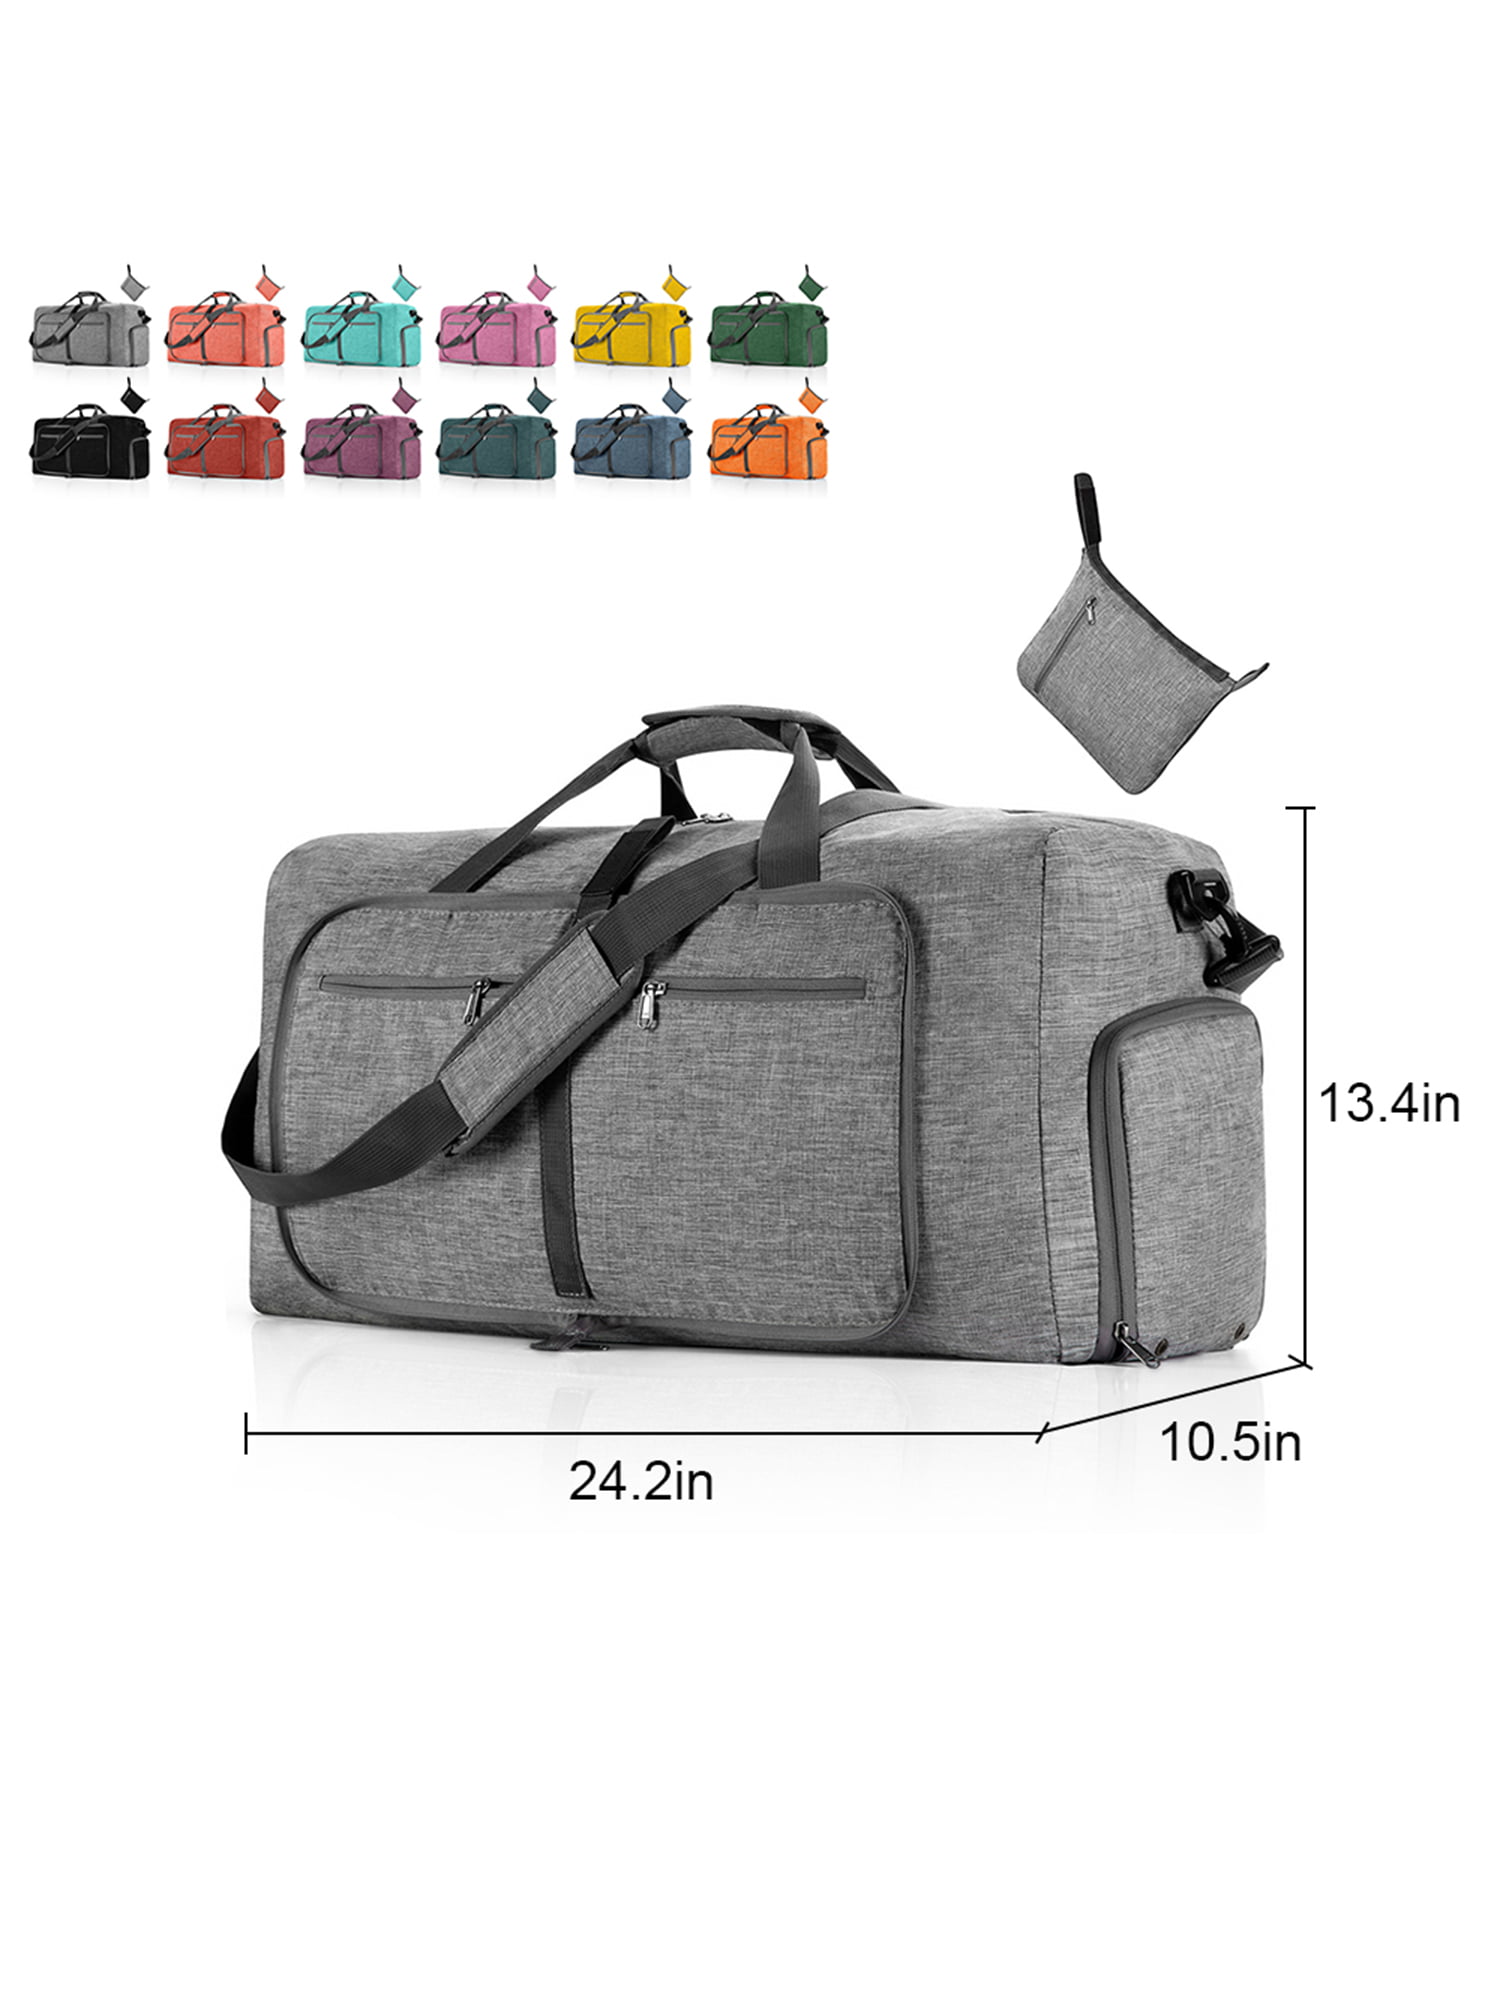 Felipe Varela 65L Duffle Bag with Shoes Compartment and Adjustable  Strap,Foldable Travel Duffel Bags for Men Women